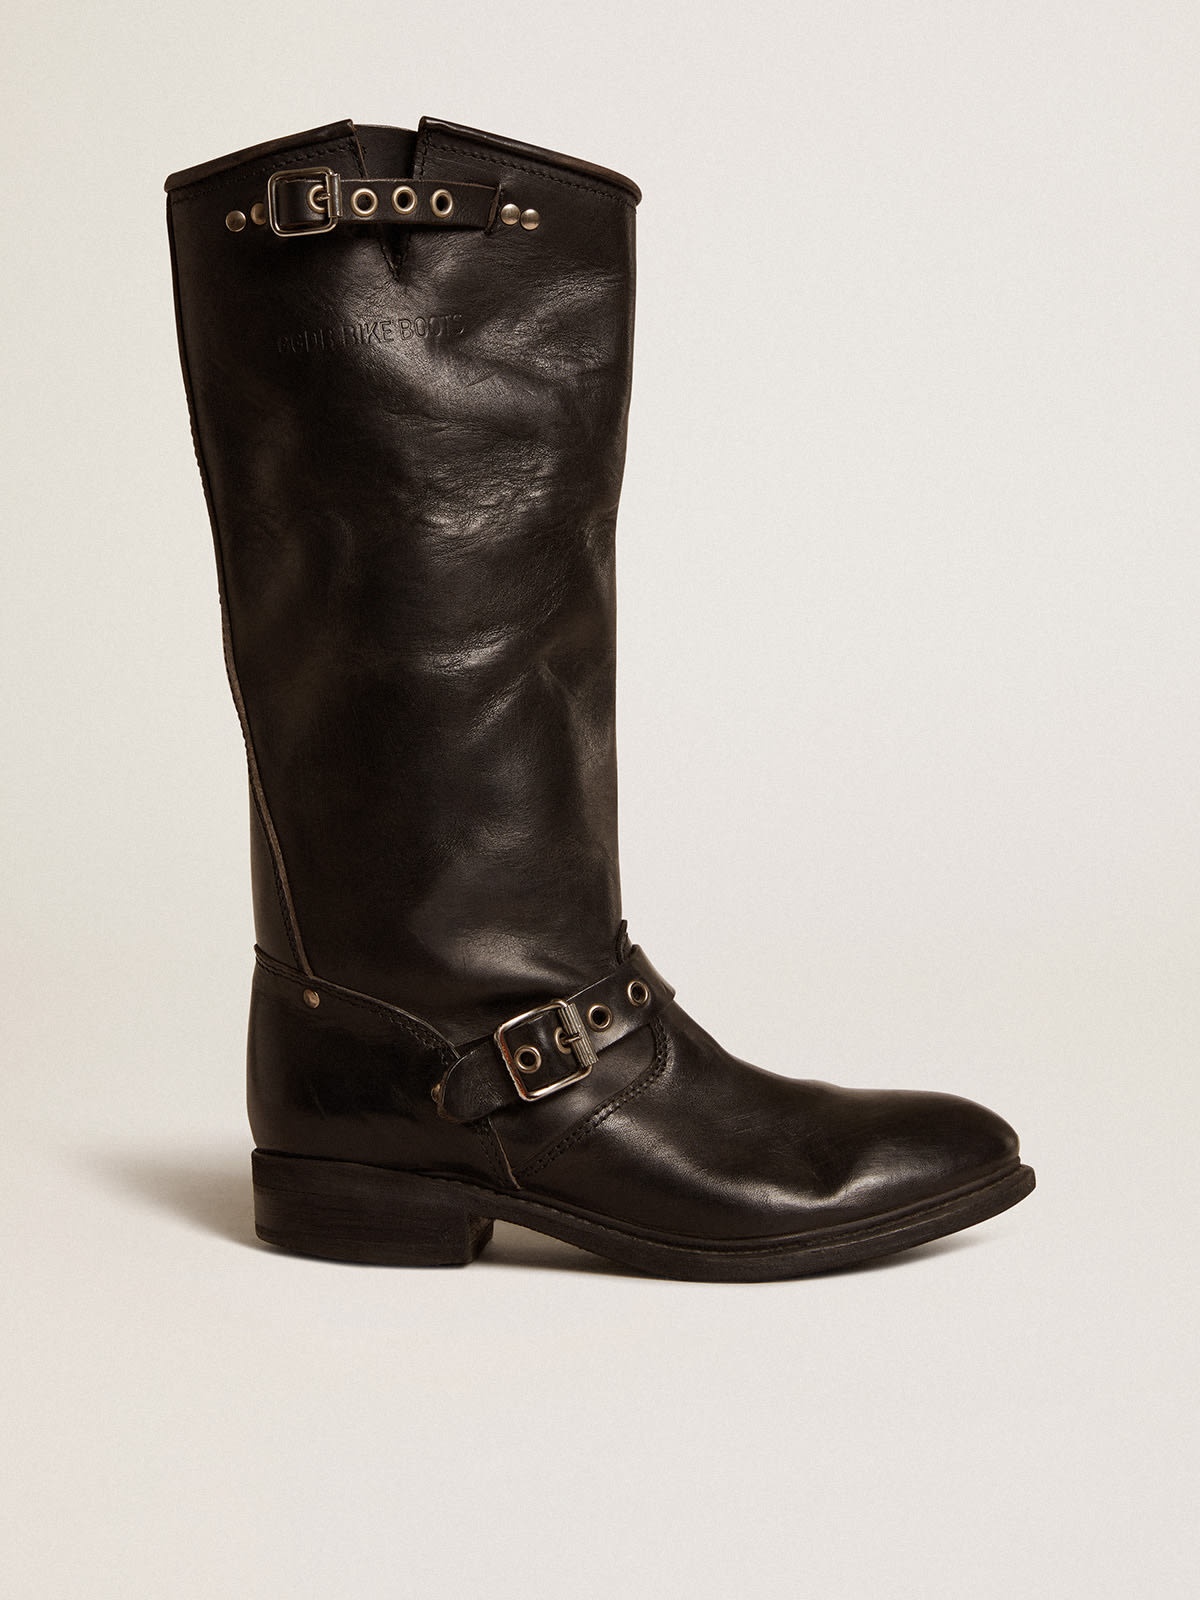 High Biker boots in black leather with silver studs and buckles - 1